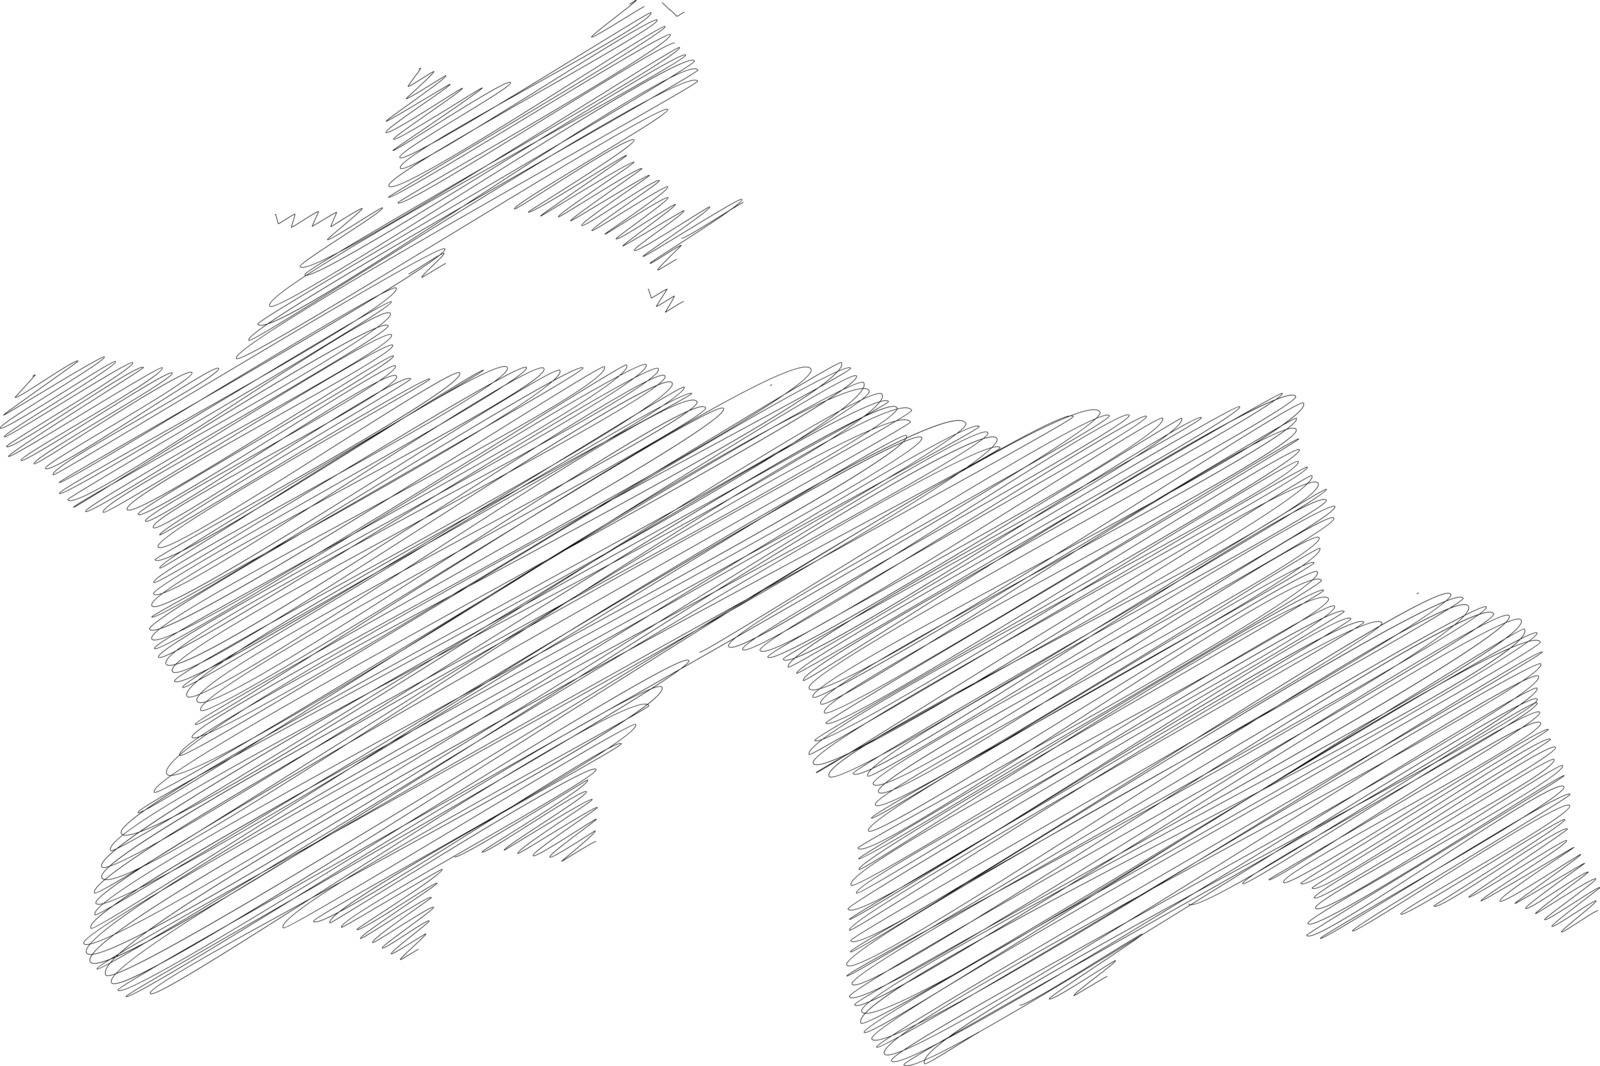 Tajikistan - pencil scribble sketch silhouette map of country area with dropped shadow. Simple flat vector illustration.